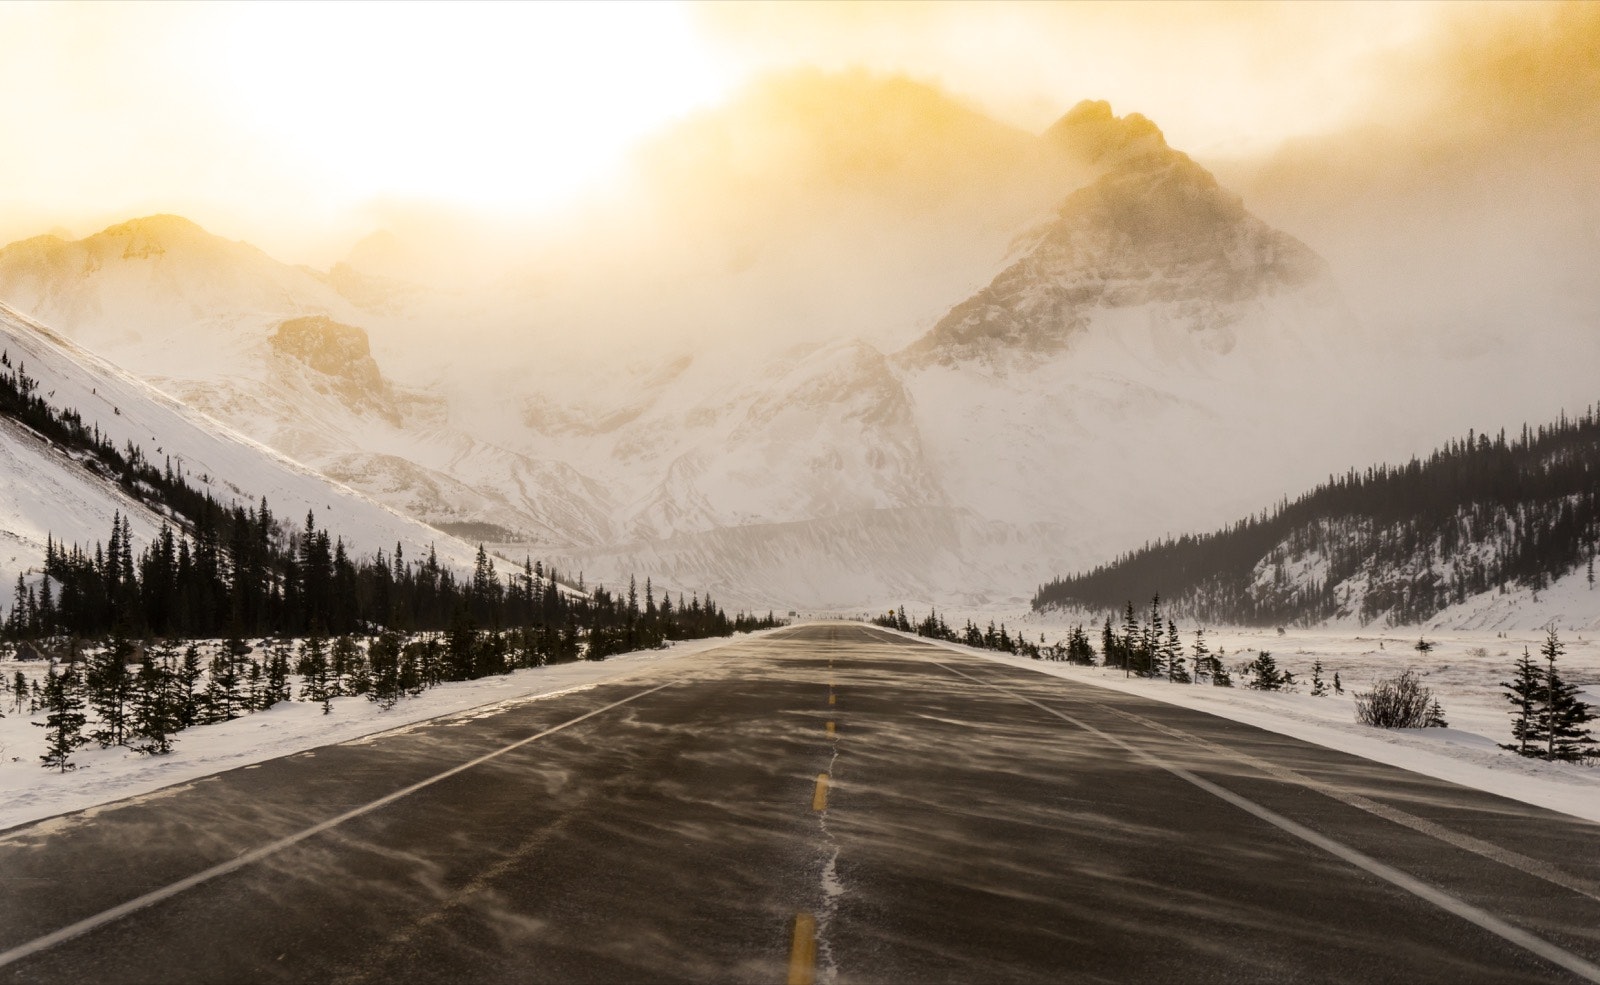 A snow-swept road is bathed in golden light as it appears to run straight into a mountain